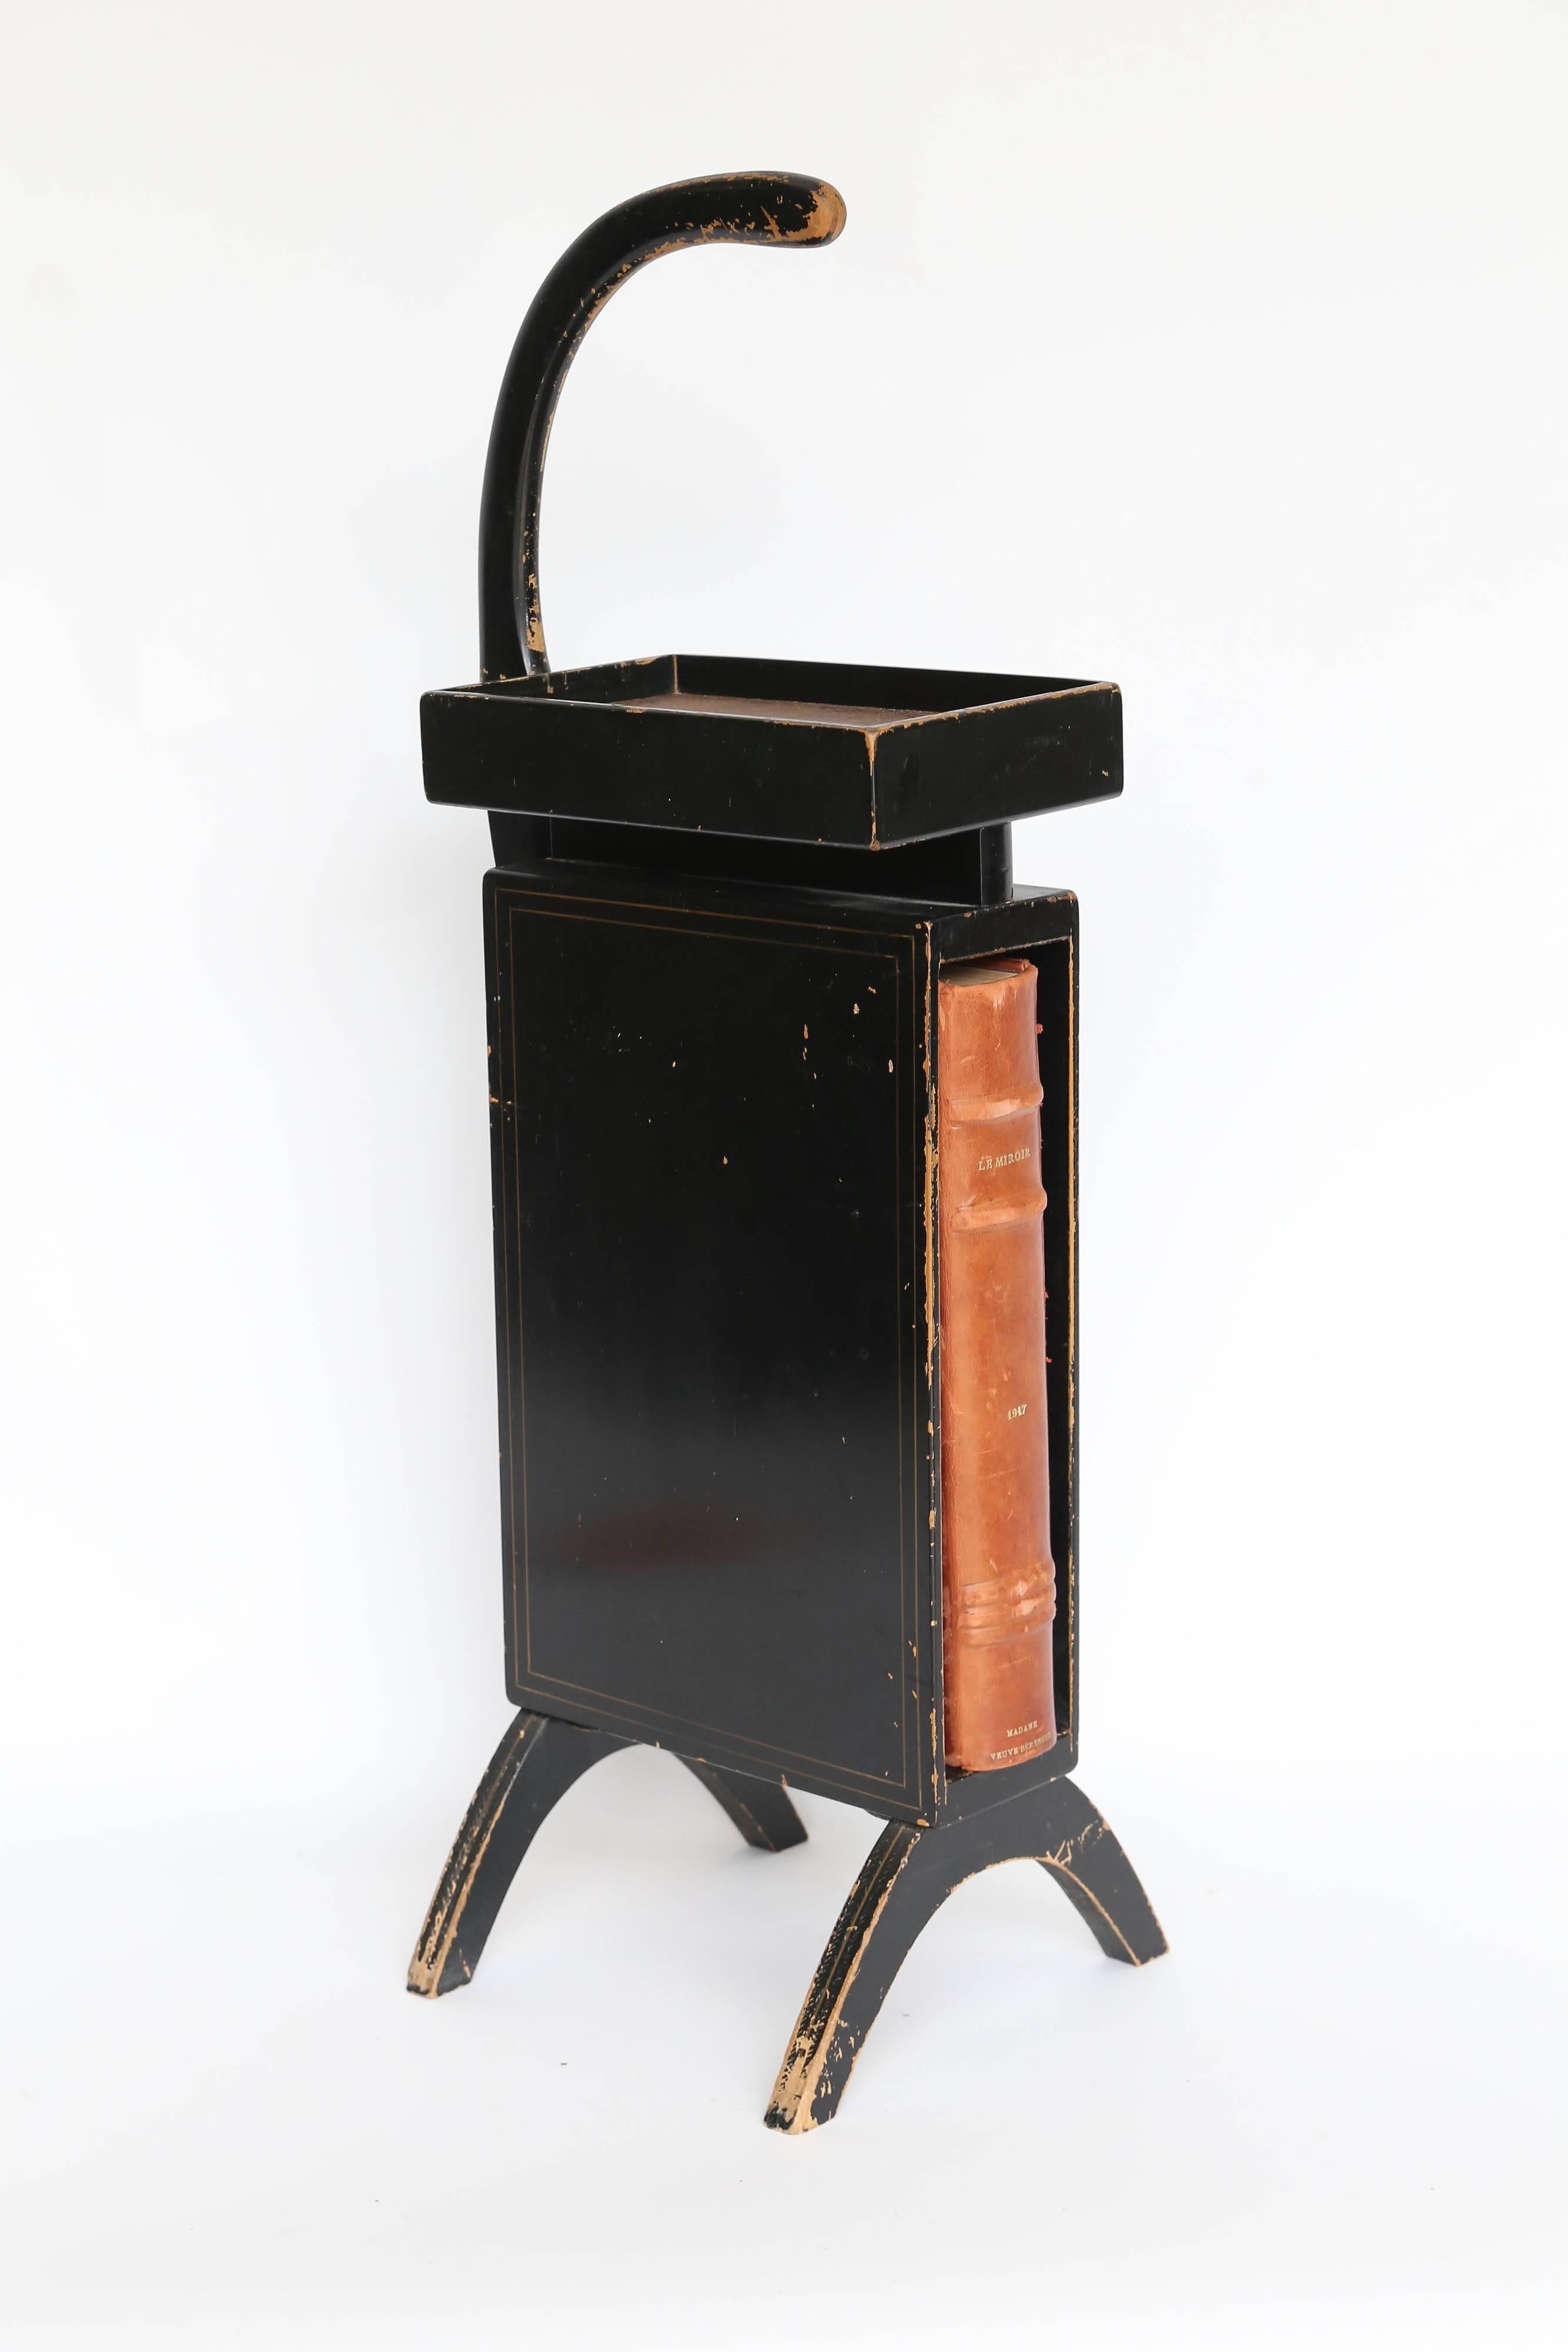 A fun and funky telephone table from back in the day! Back when telephones were attached to the wall by a cord, almost every home had a telephone table and this one is exemplary. Black wood with thin gold striping, a faux hide liner in the phone